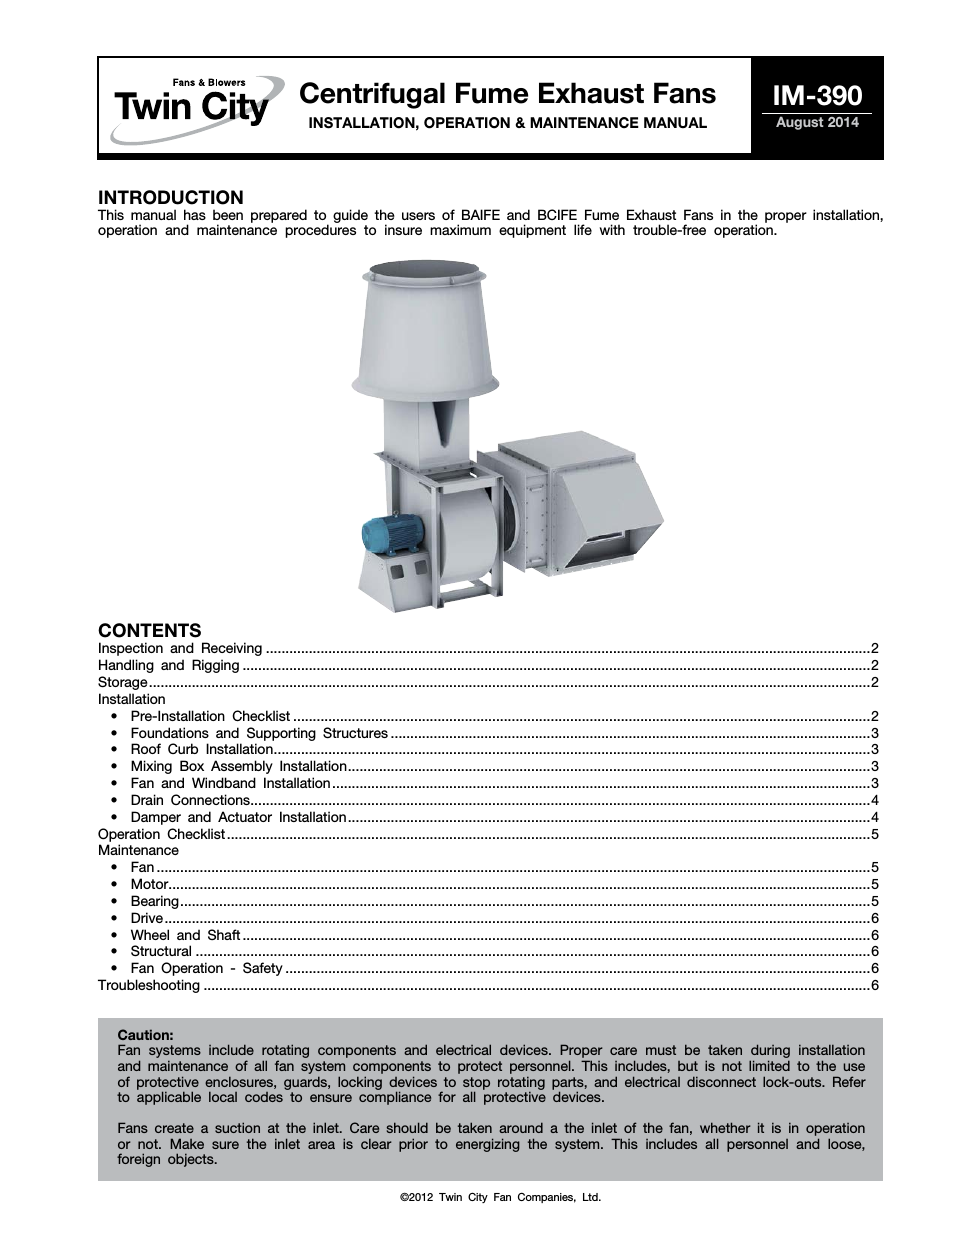 Centrifugal Fume Exhaust Fans - IM-390